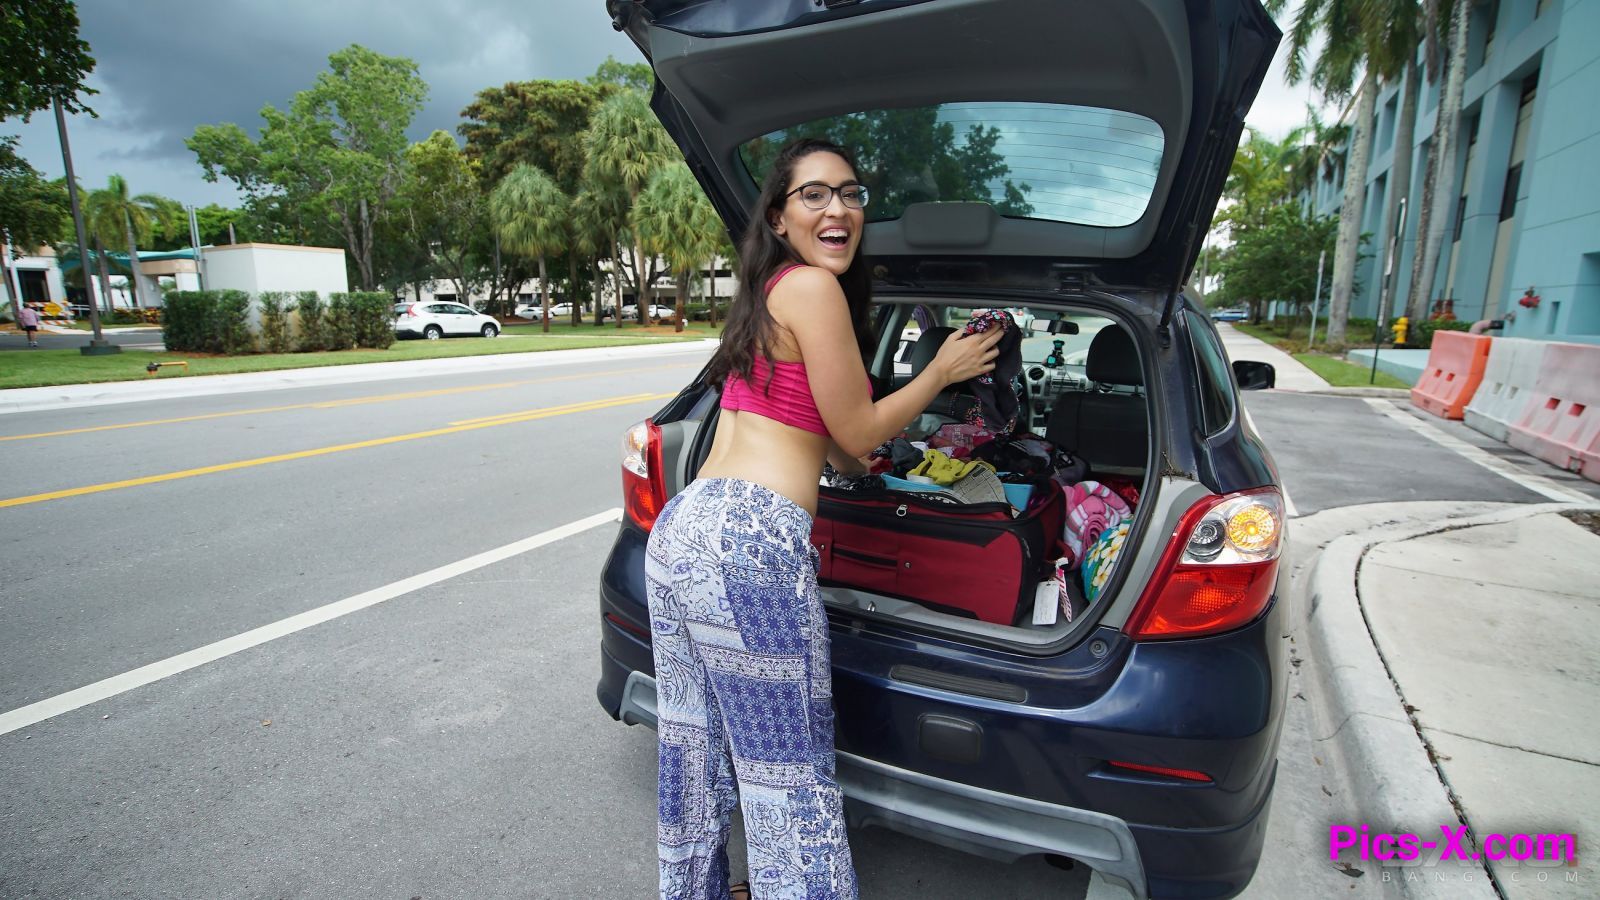 Xaya Lovelle is a hippie chick that will fuck to get her car fixed - Image 10